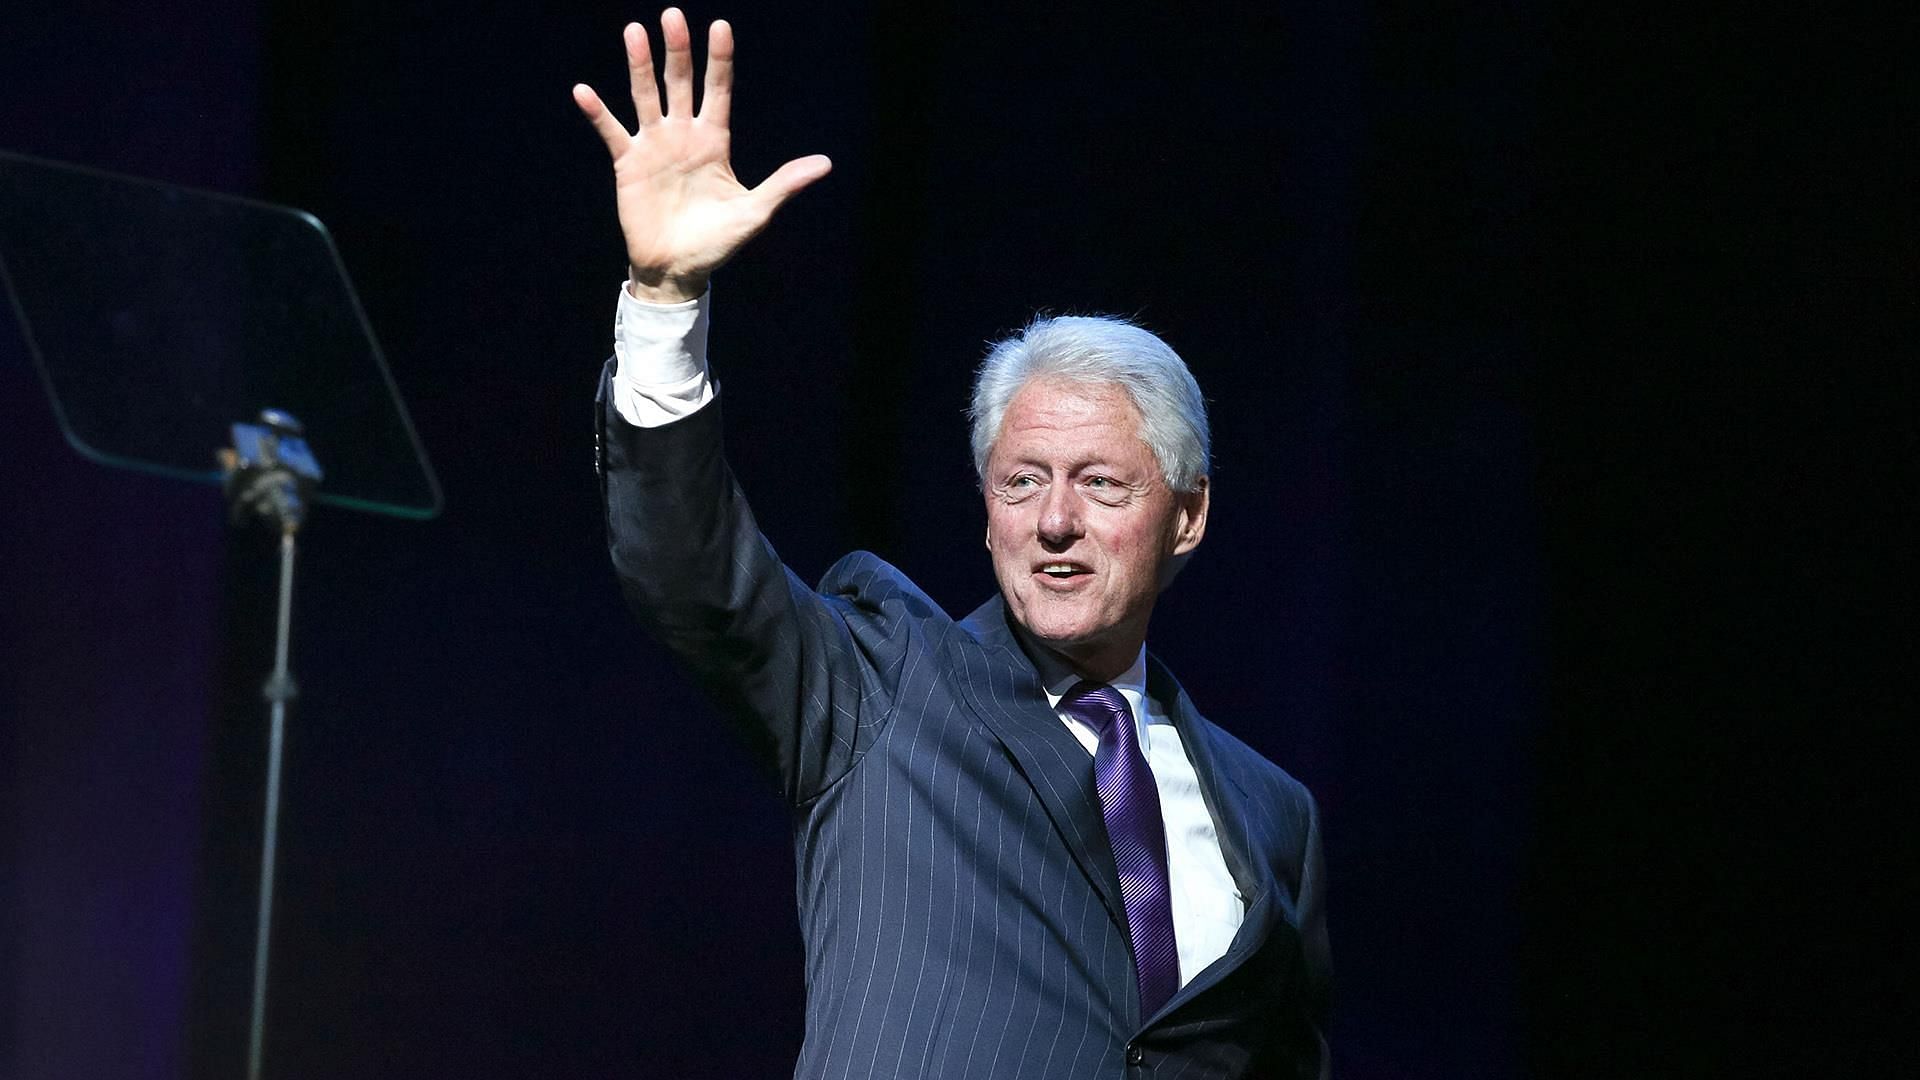 Former US President Bill Clinton was admitted to a hospital for a urinary tract infection (Image via Getty Images)